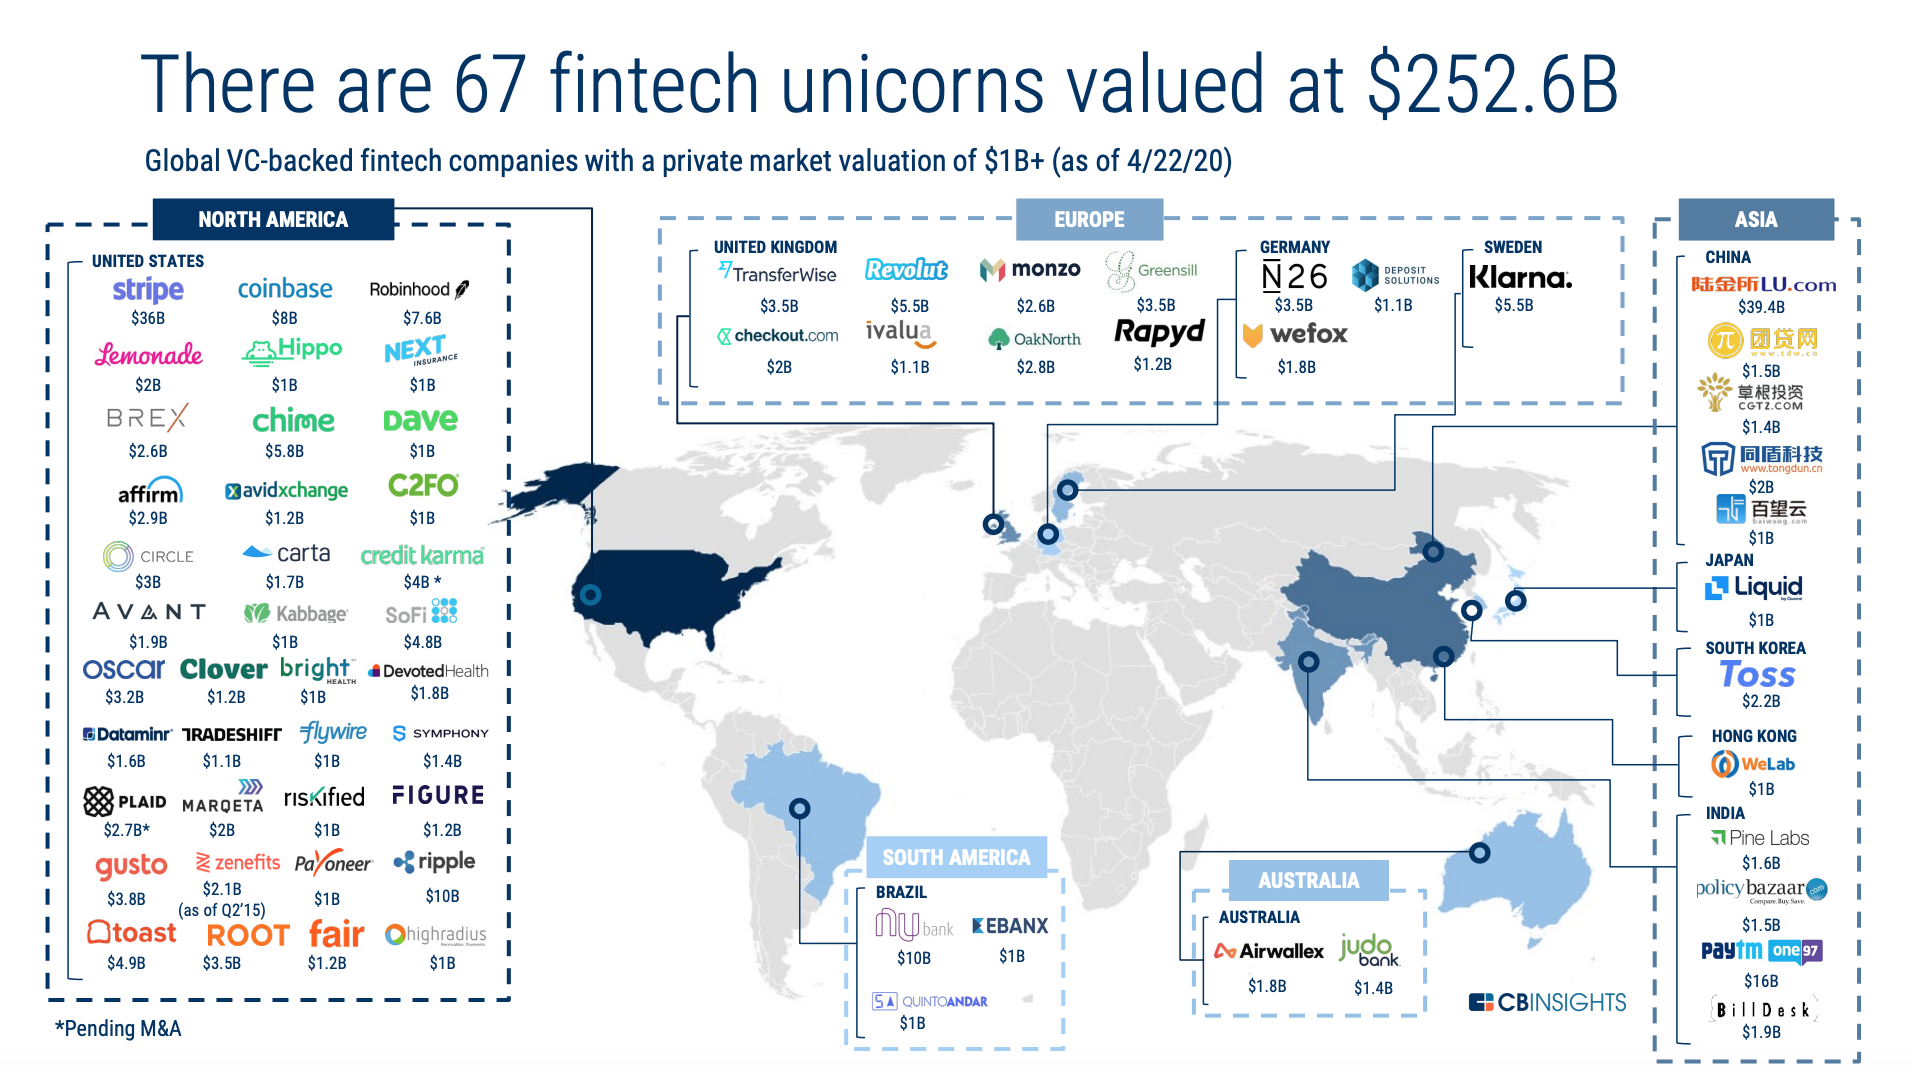 Global VC-backed fintech companies with a private market valuation of $1B+ (as of 4:22:20), Source- CB Insights, State of Fintech Q1'20 Report, May 2020